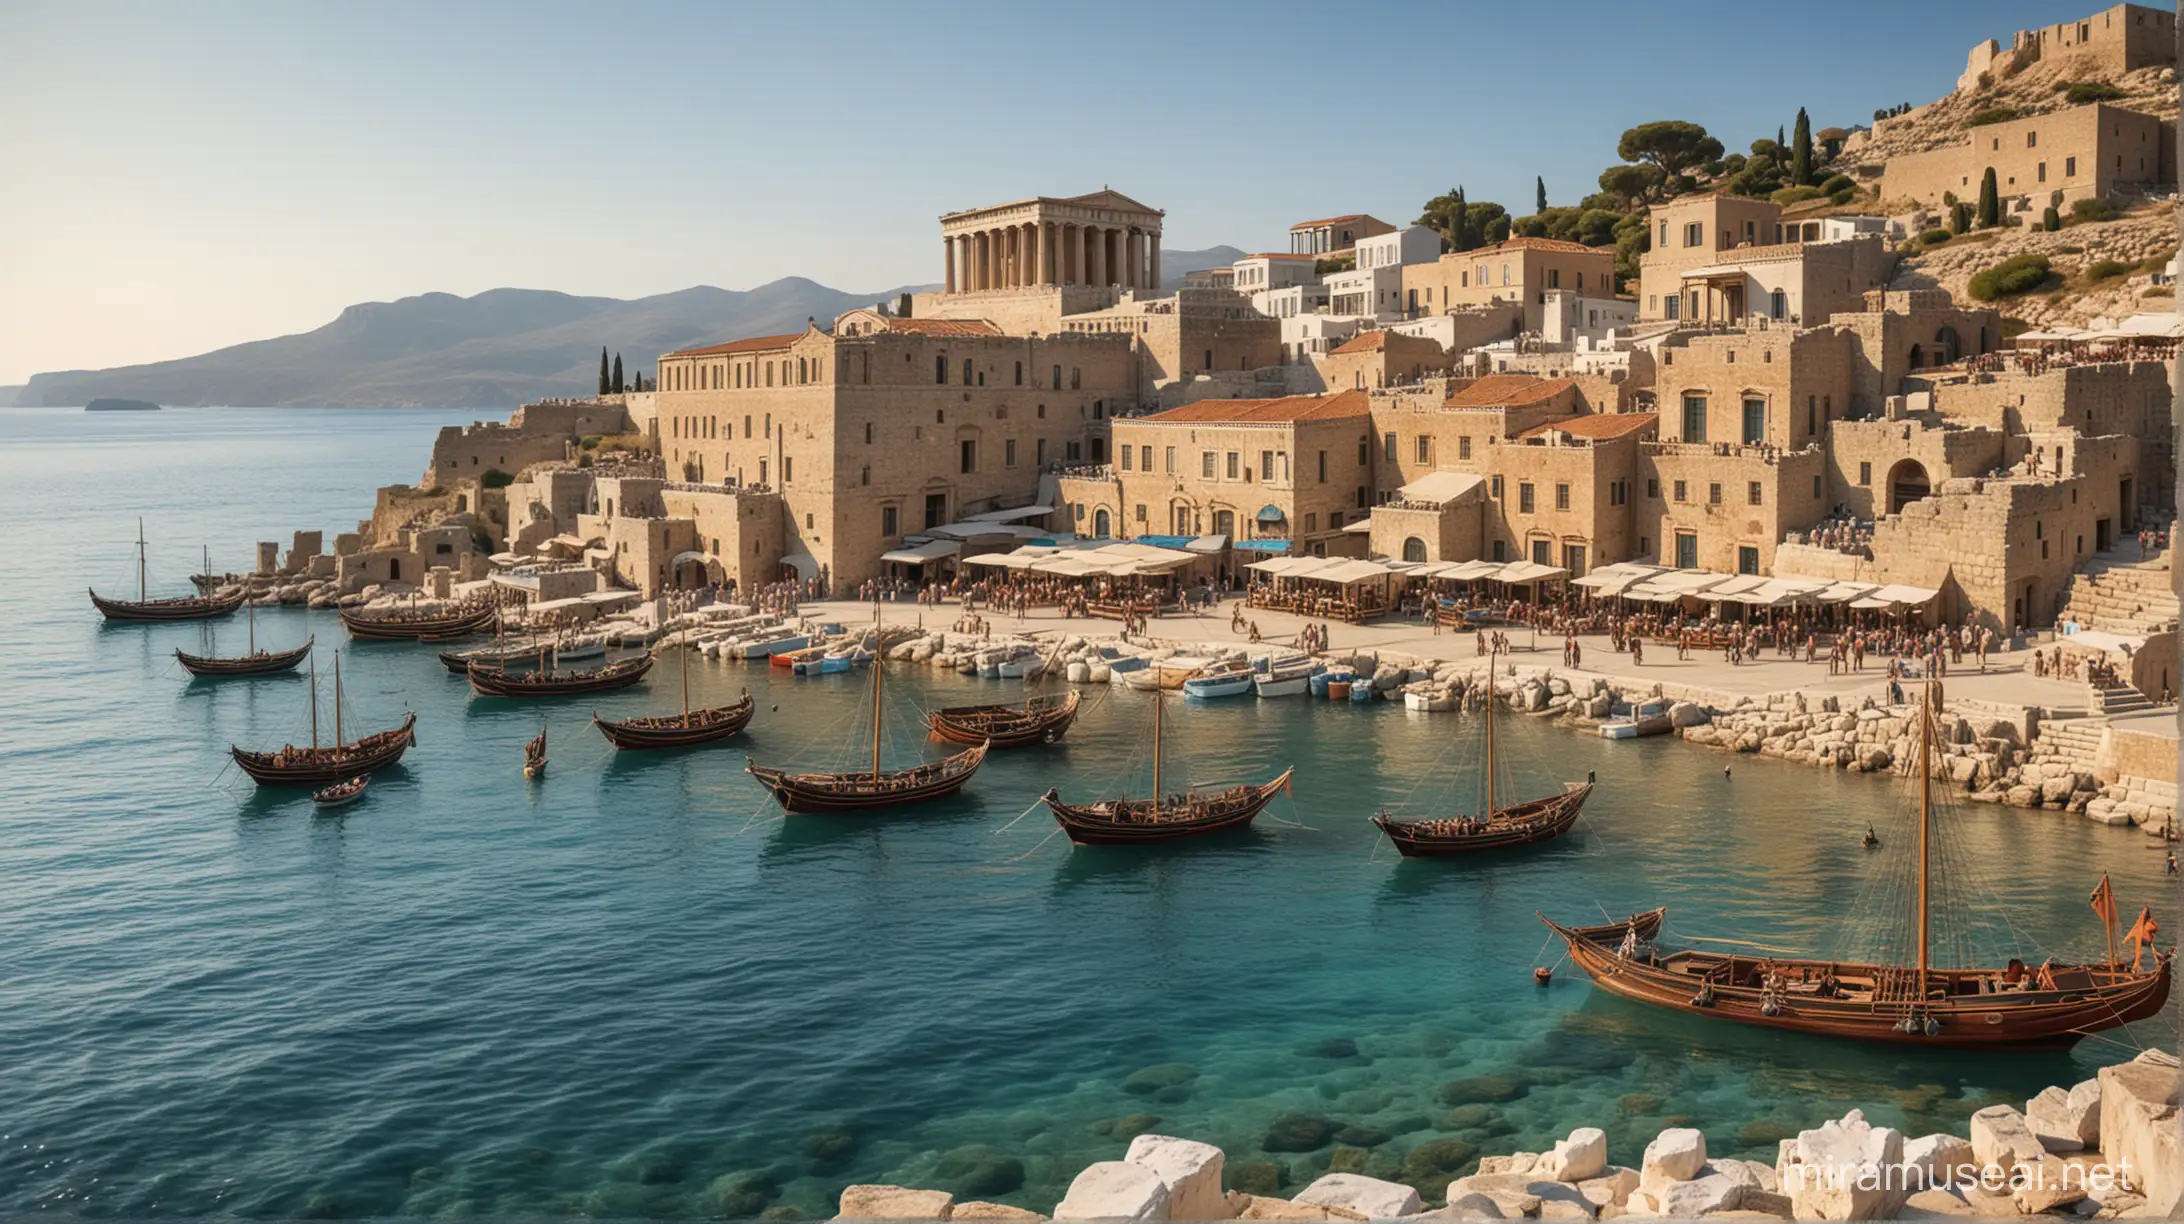 Ancient Greek trading port town busy with ships and people seen from the sea